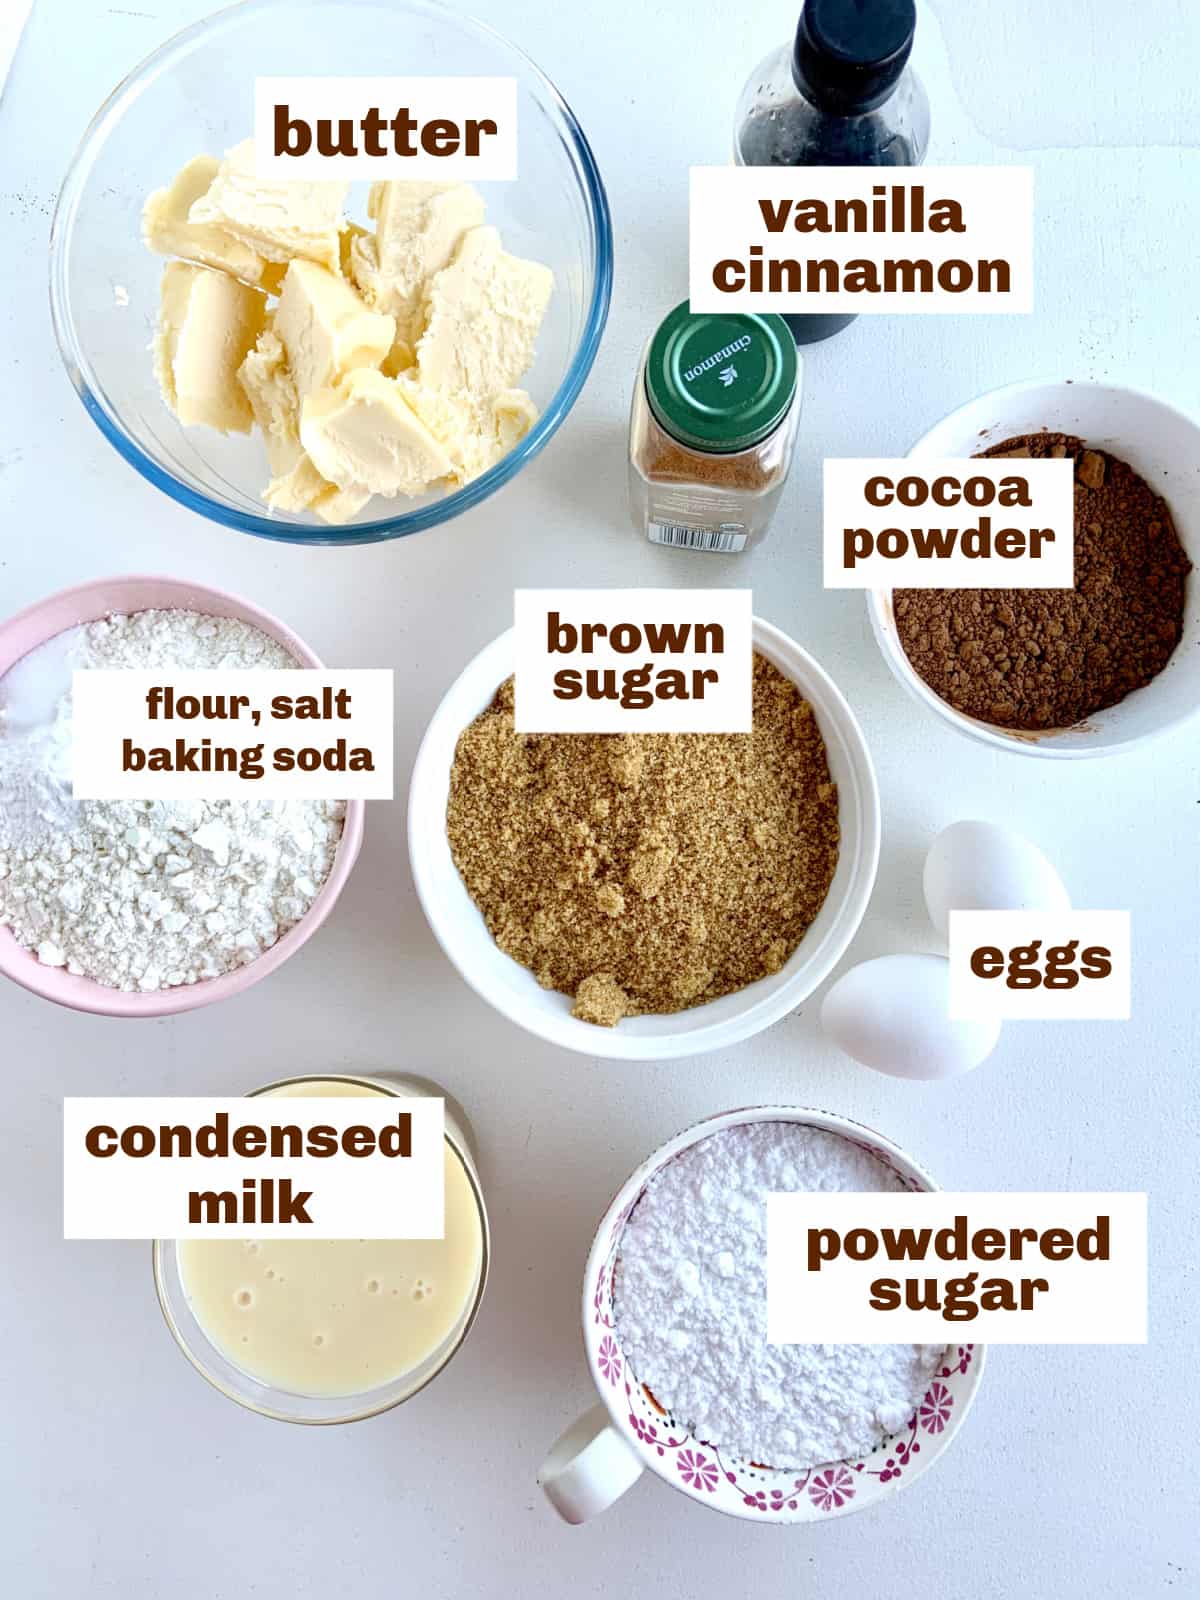 Bowls with chocolate cake ingredients on light colored surface, image with text